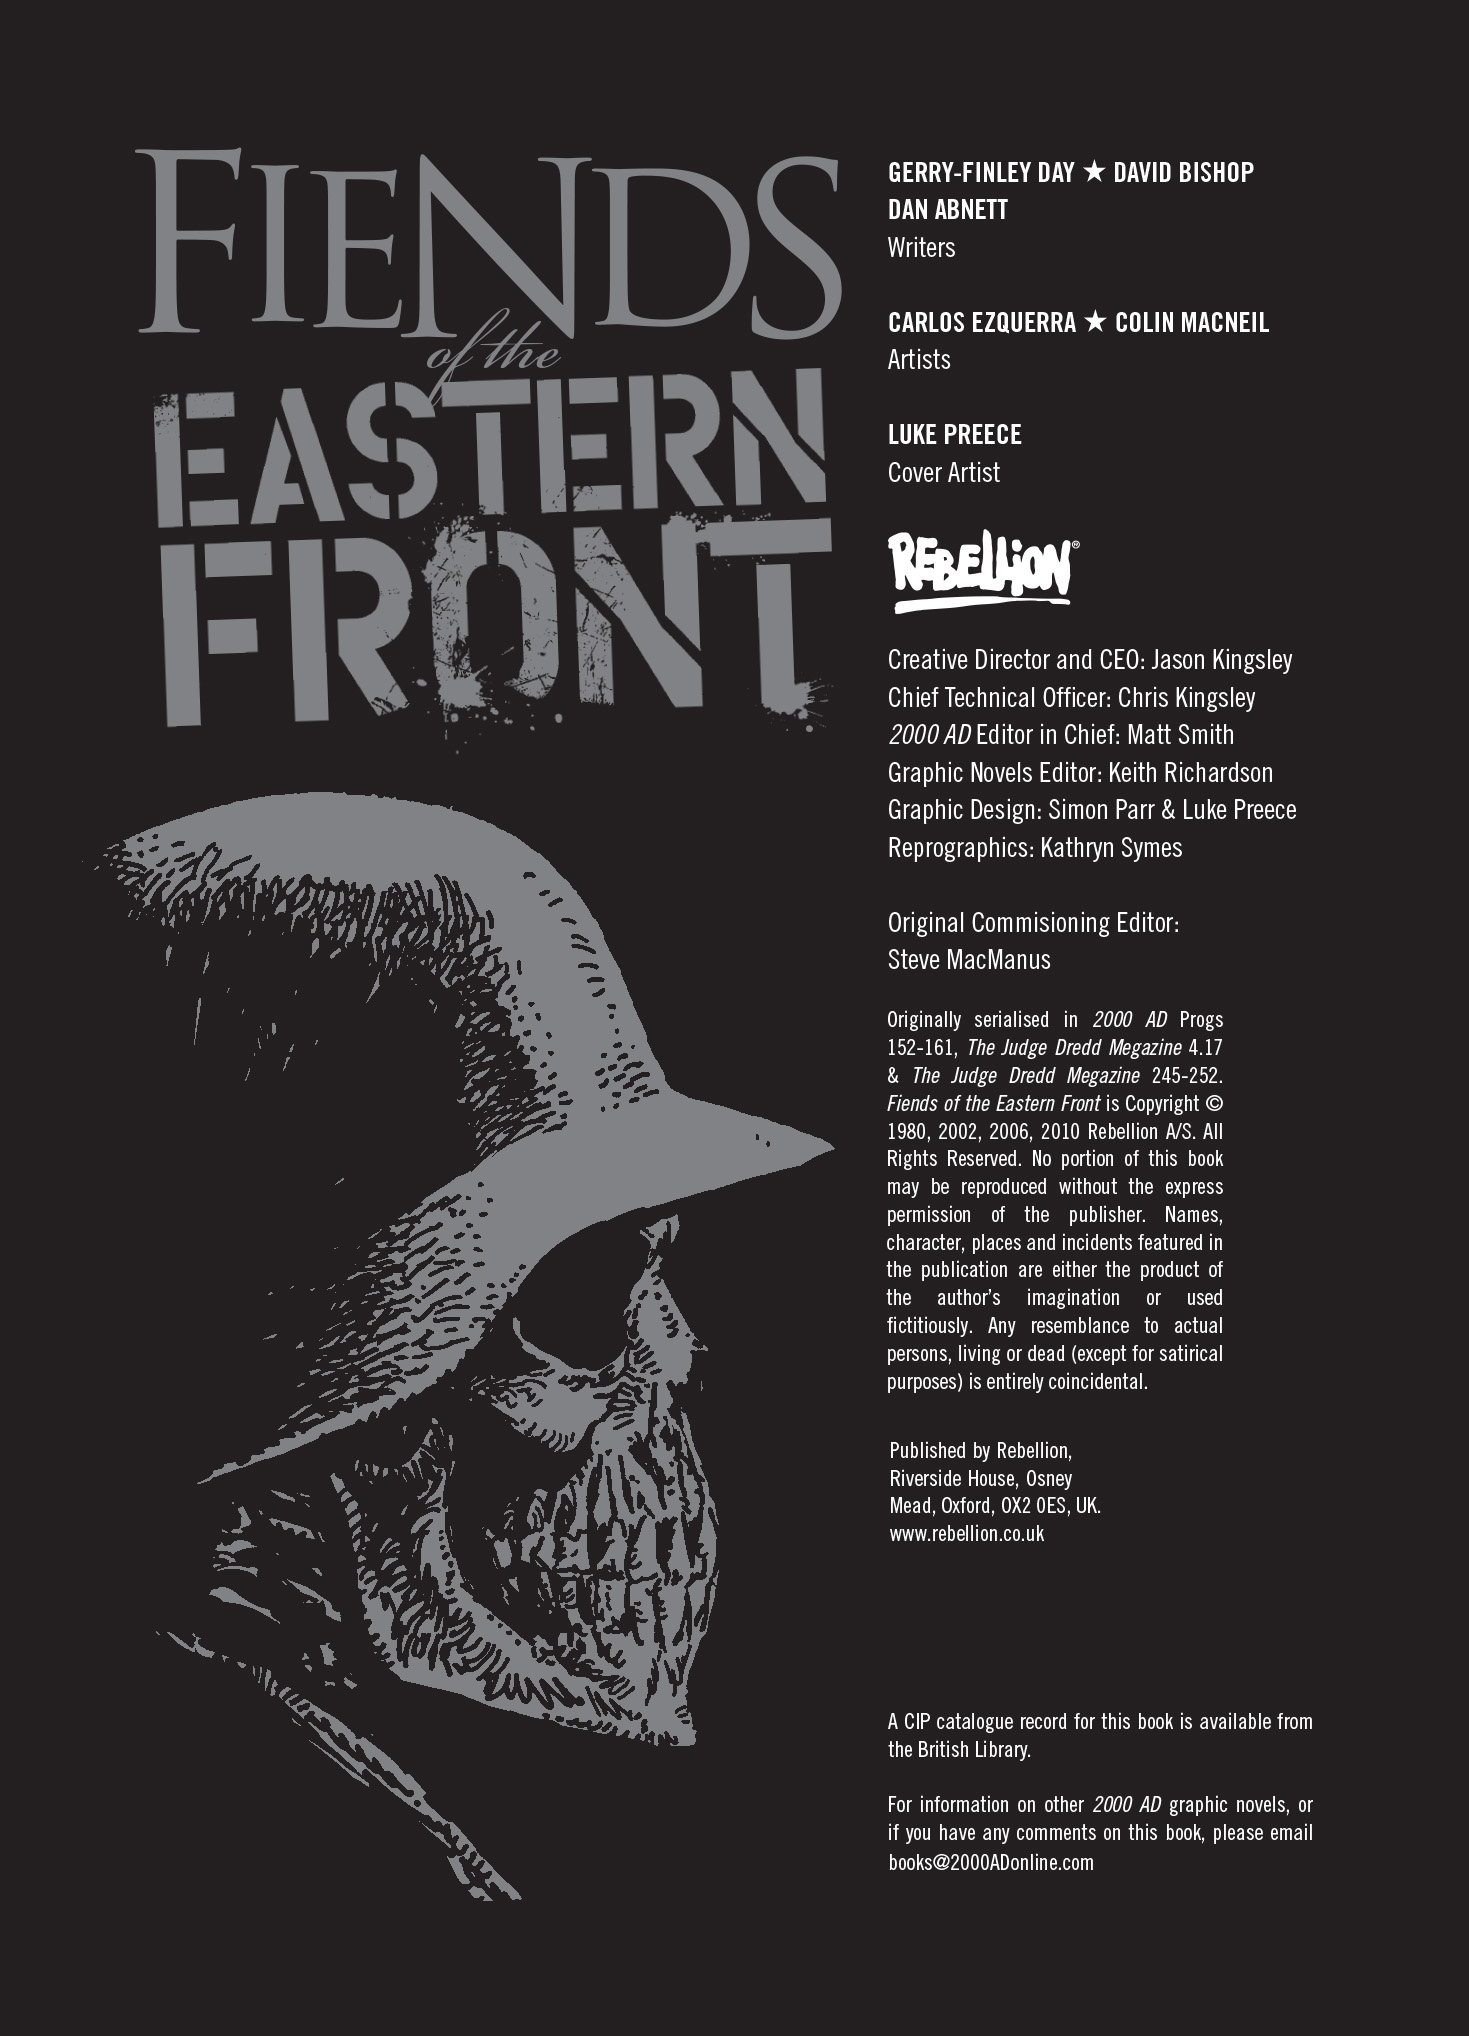 Read online Fiends of the Eastern Front comic -  Issue # TPB - 4